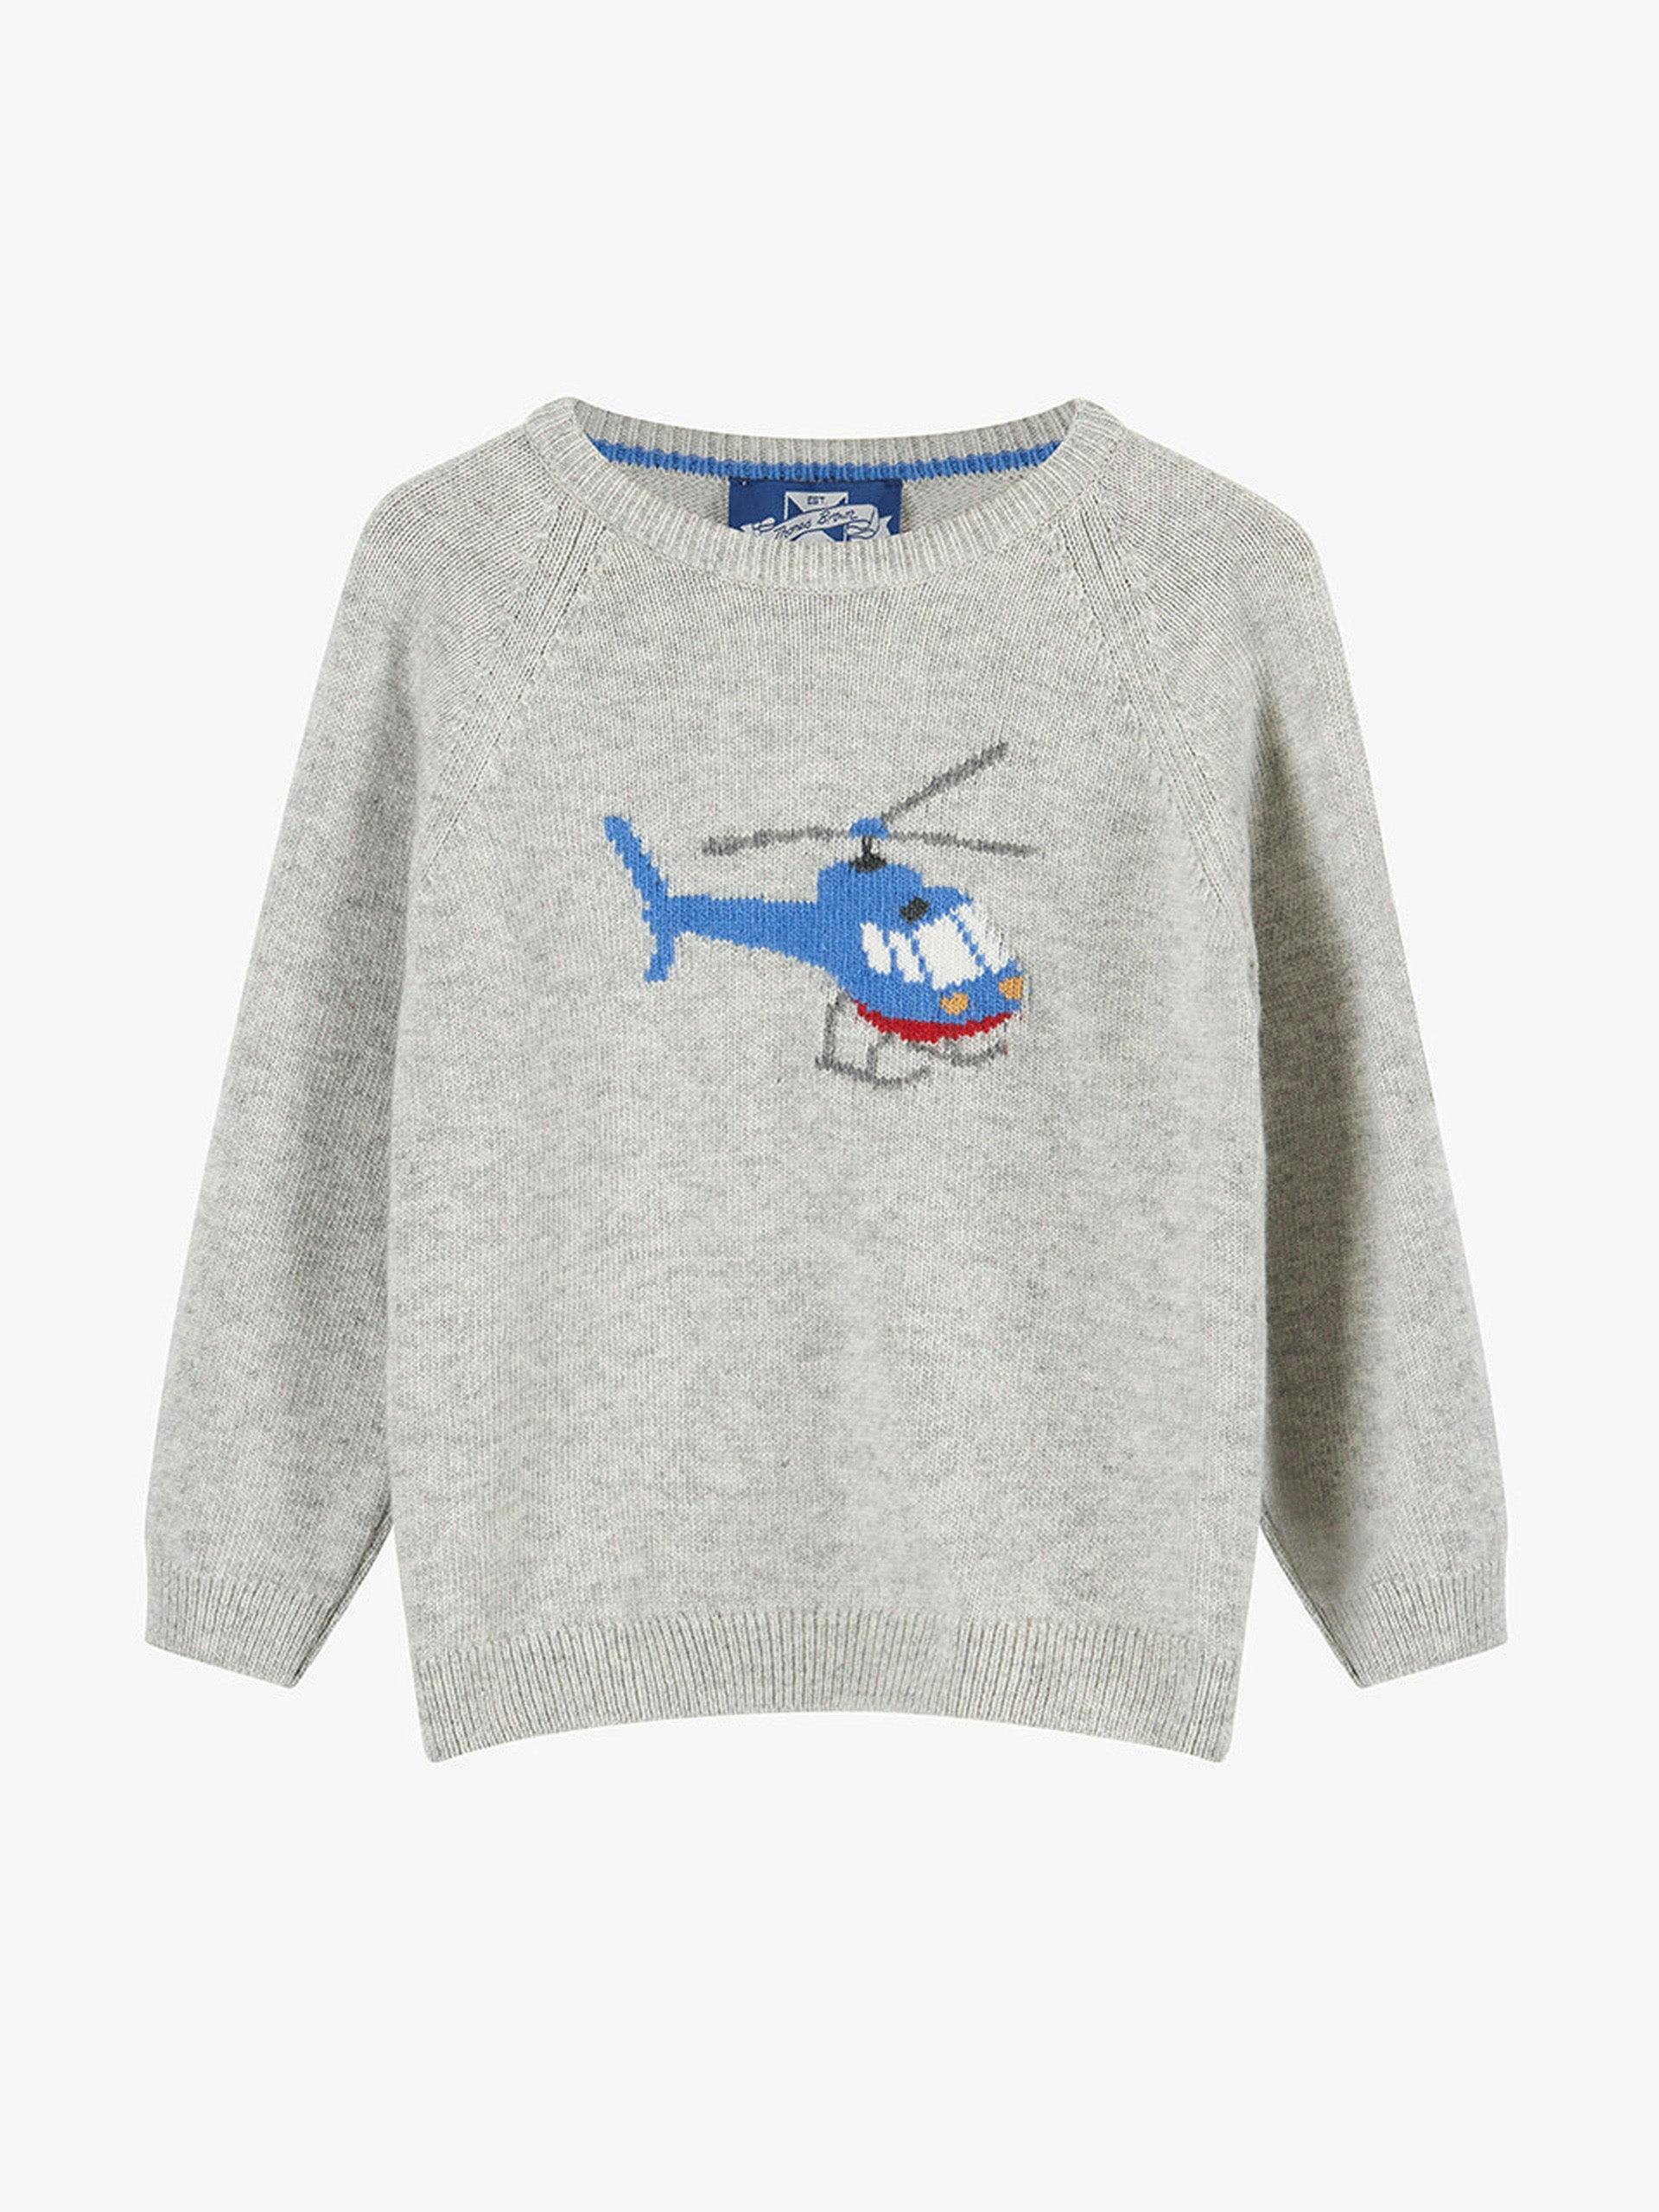 Helicopter boys jumper